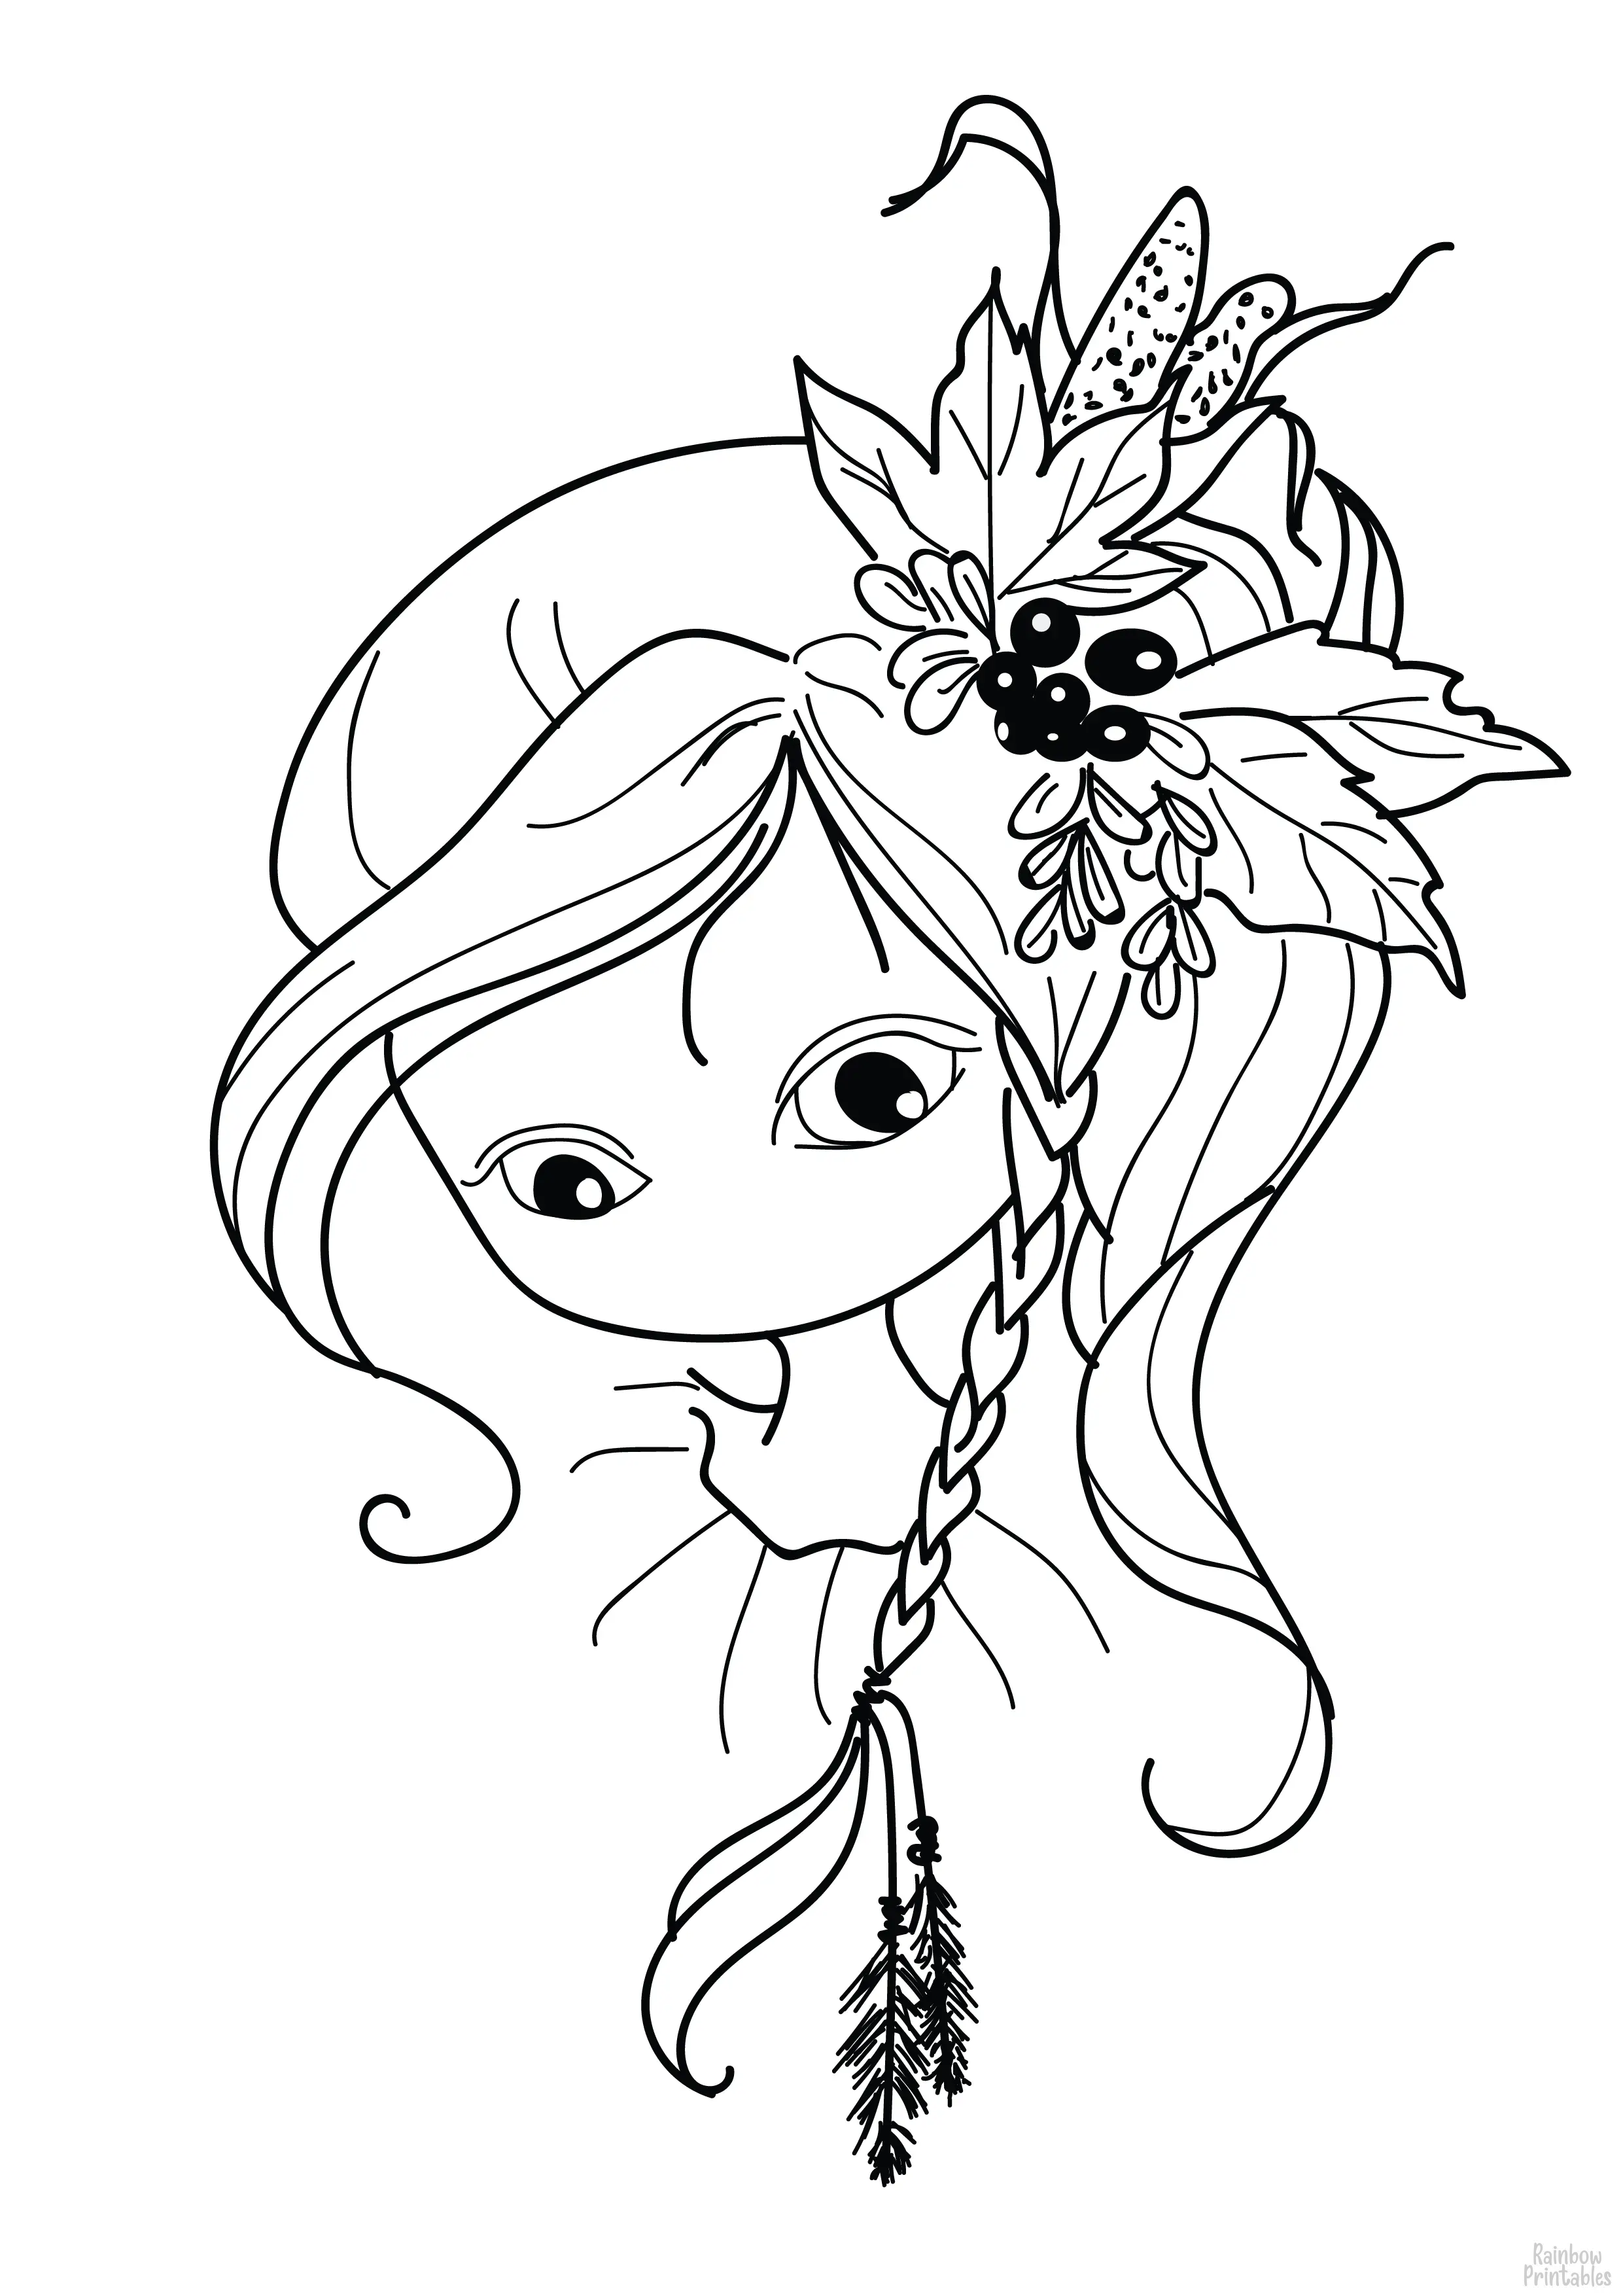 Ponytail Fairy Girl Headwear Free Clipart Coloring Pages for Kids Adults Art Activities Line Art